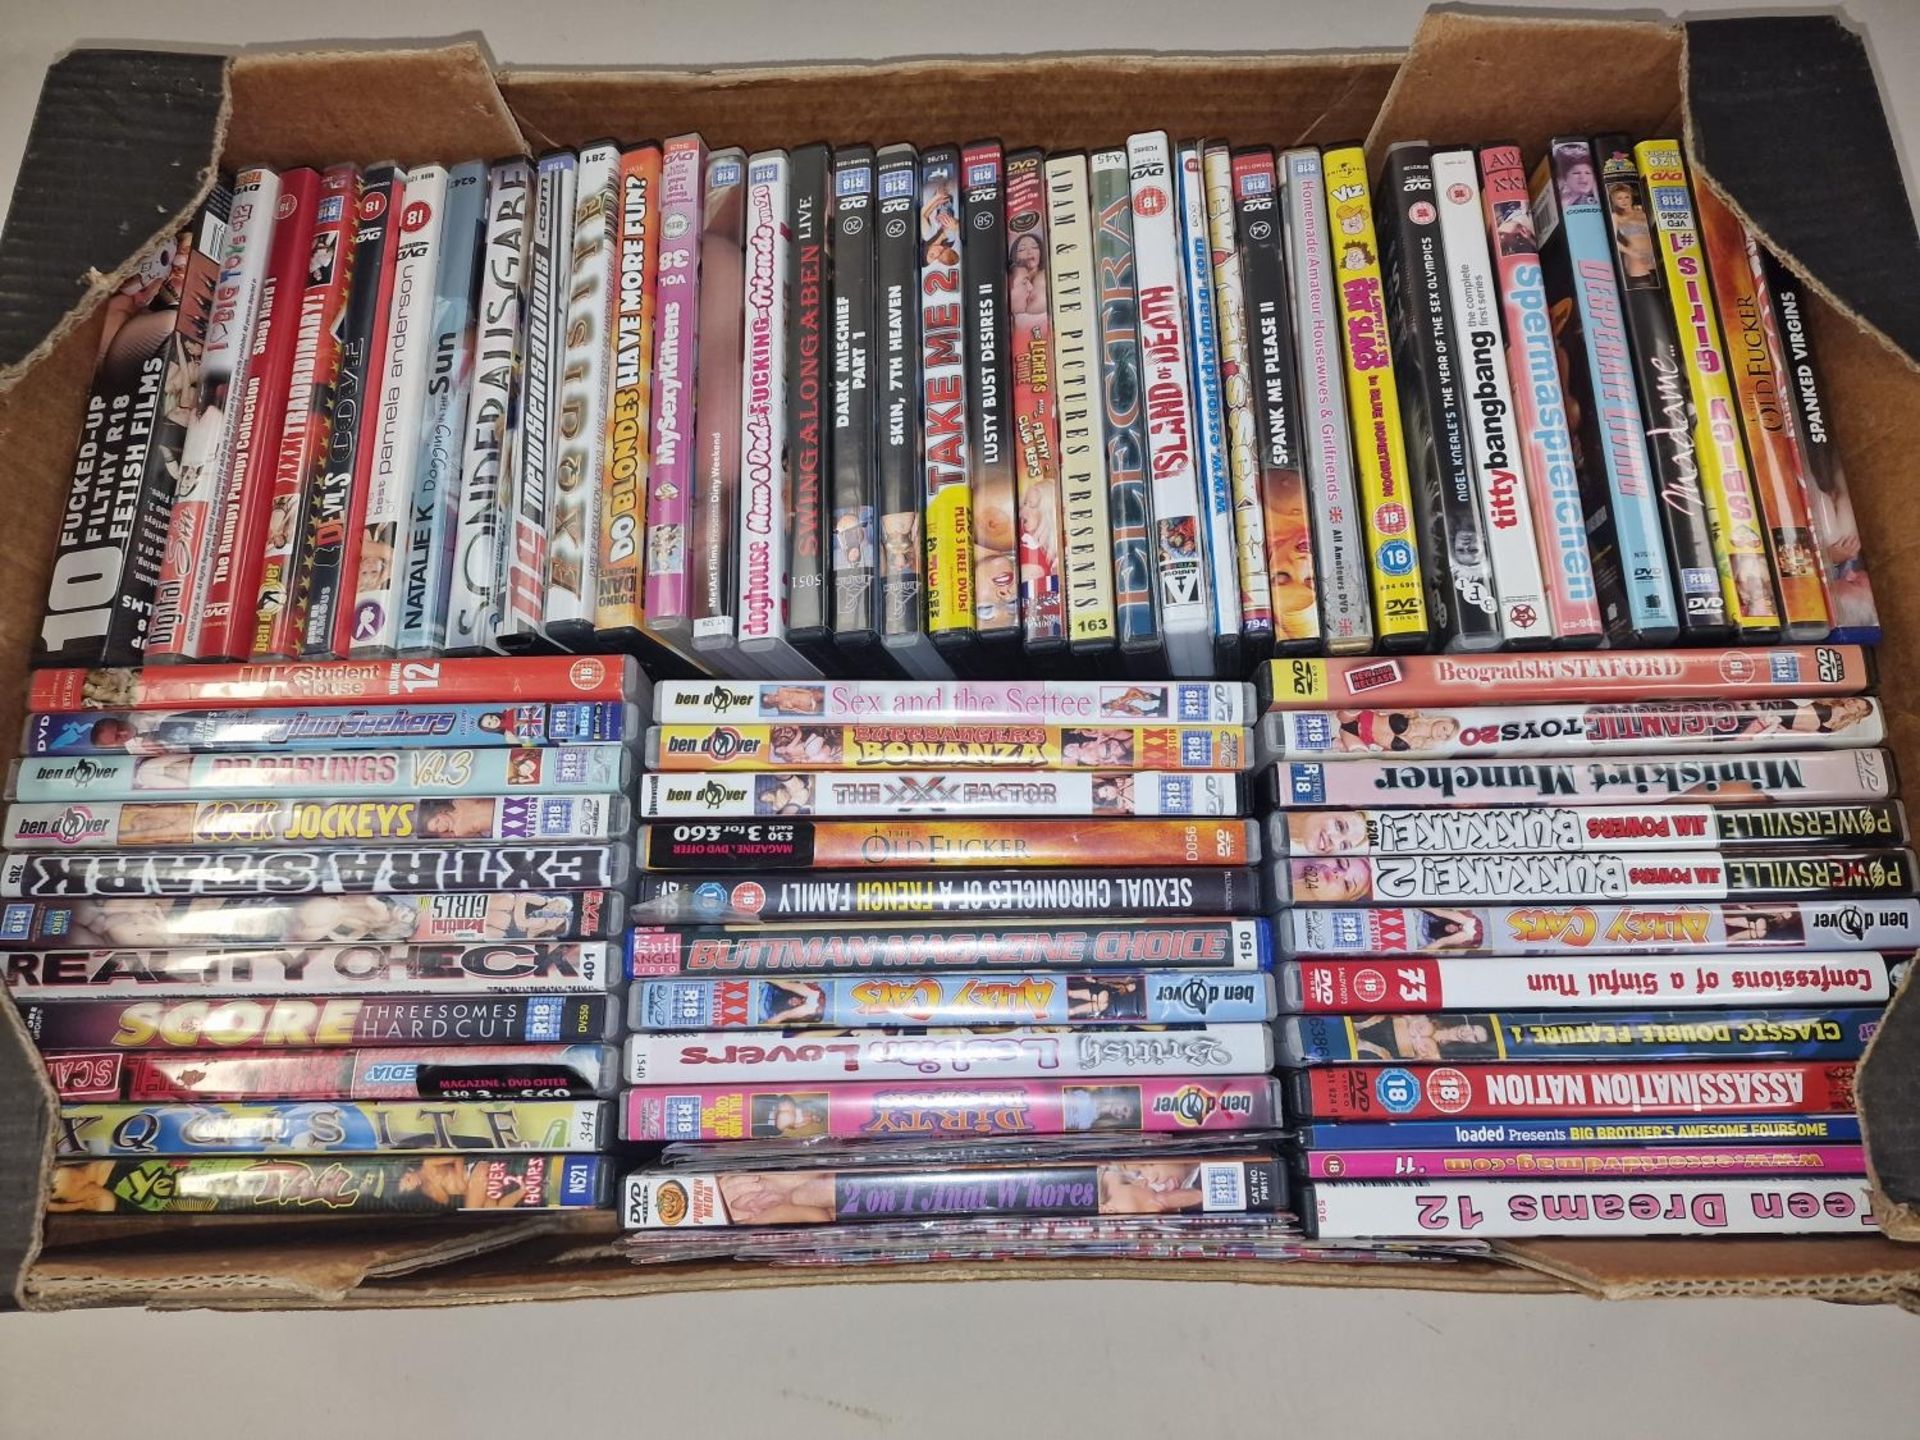 Large tray of various naughty X rated pornographic DVD’s.